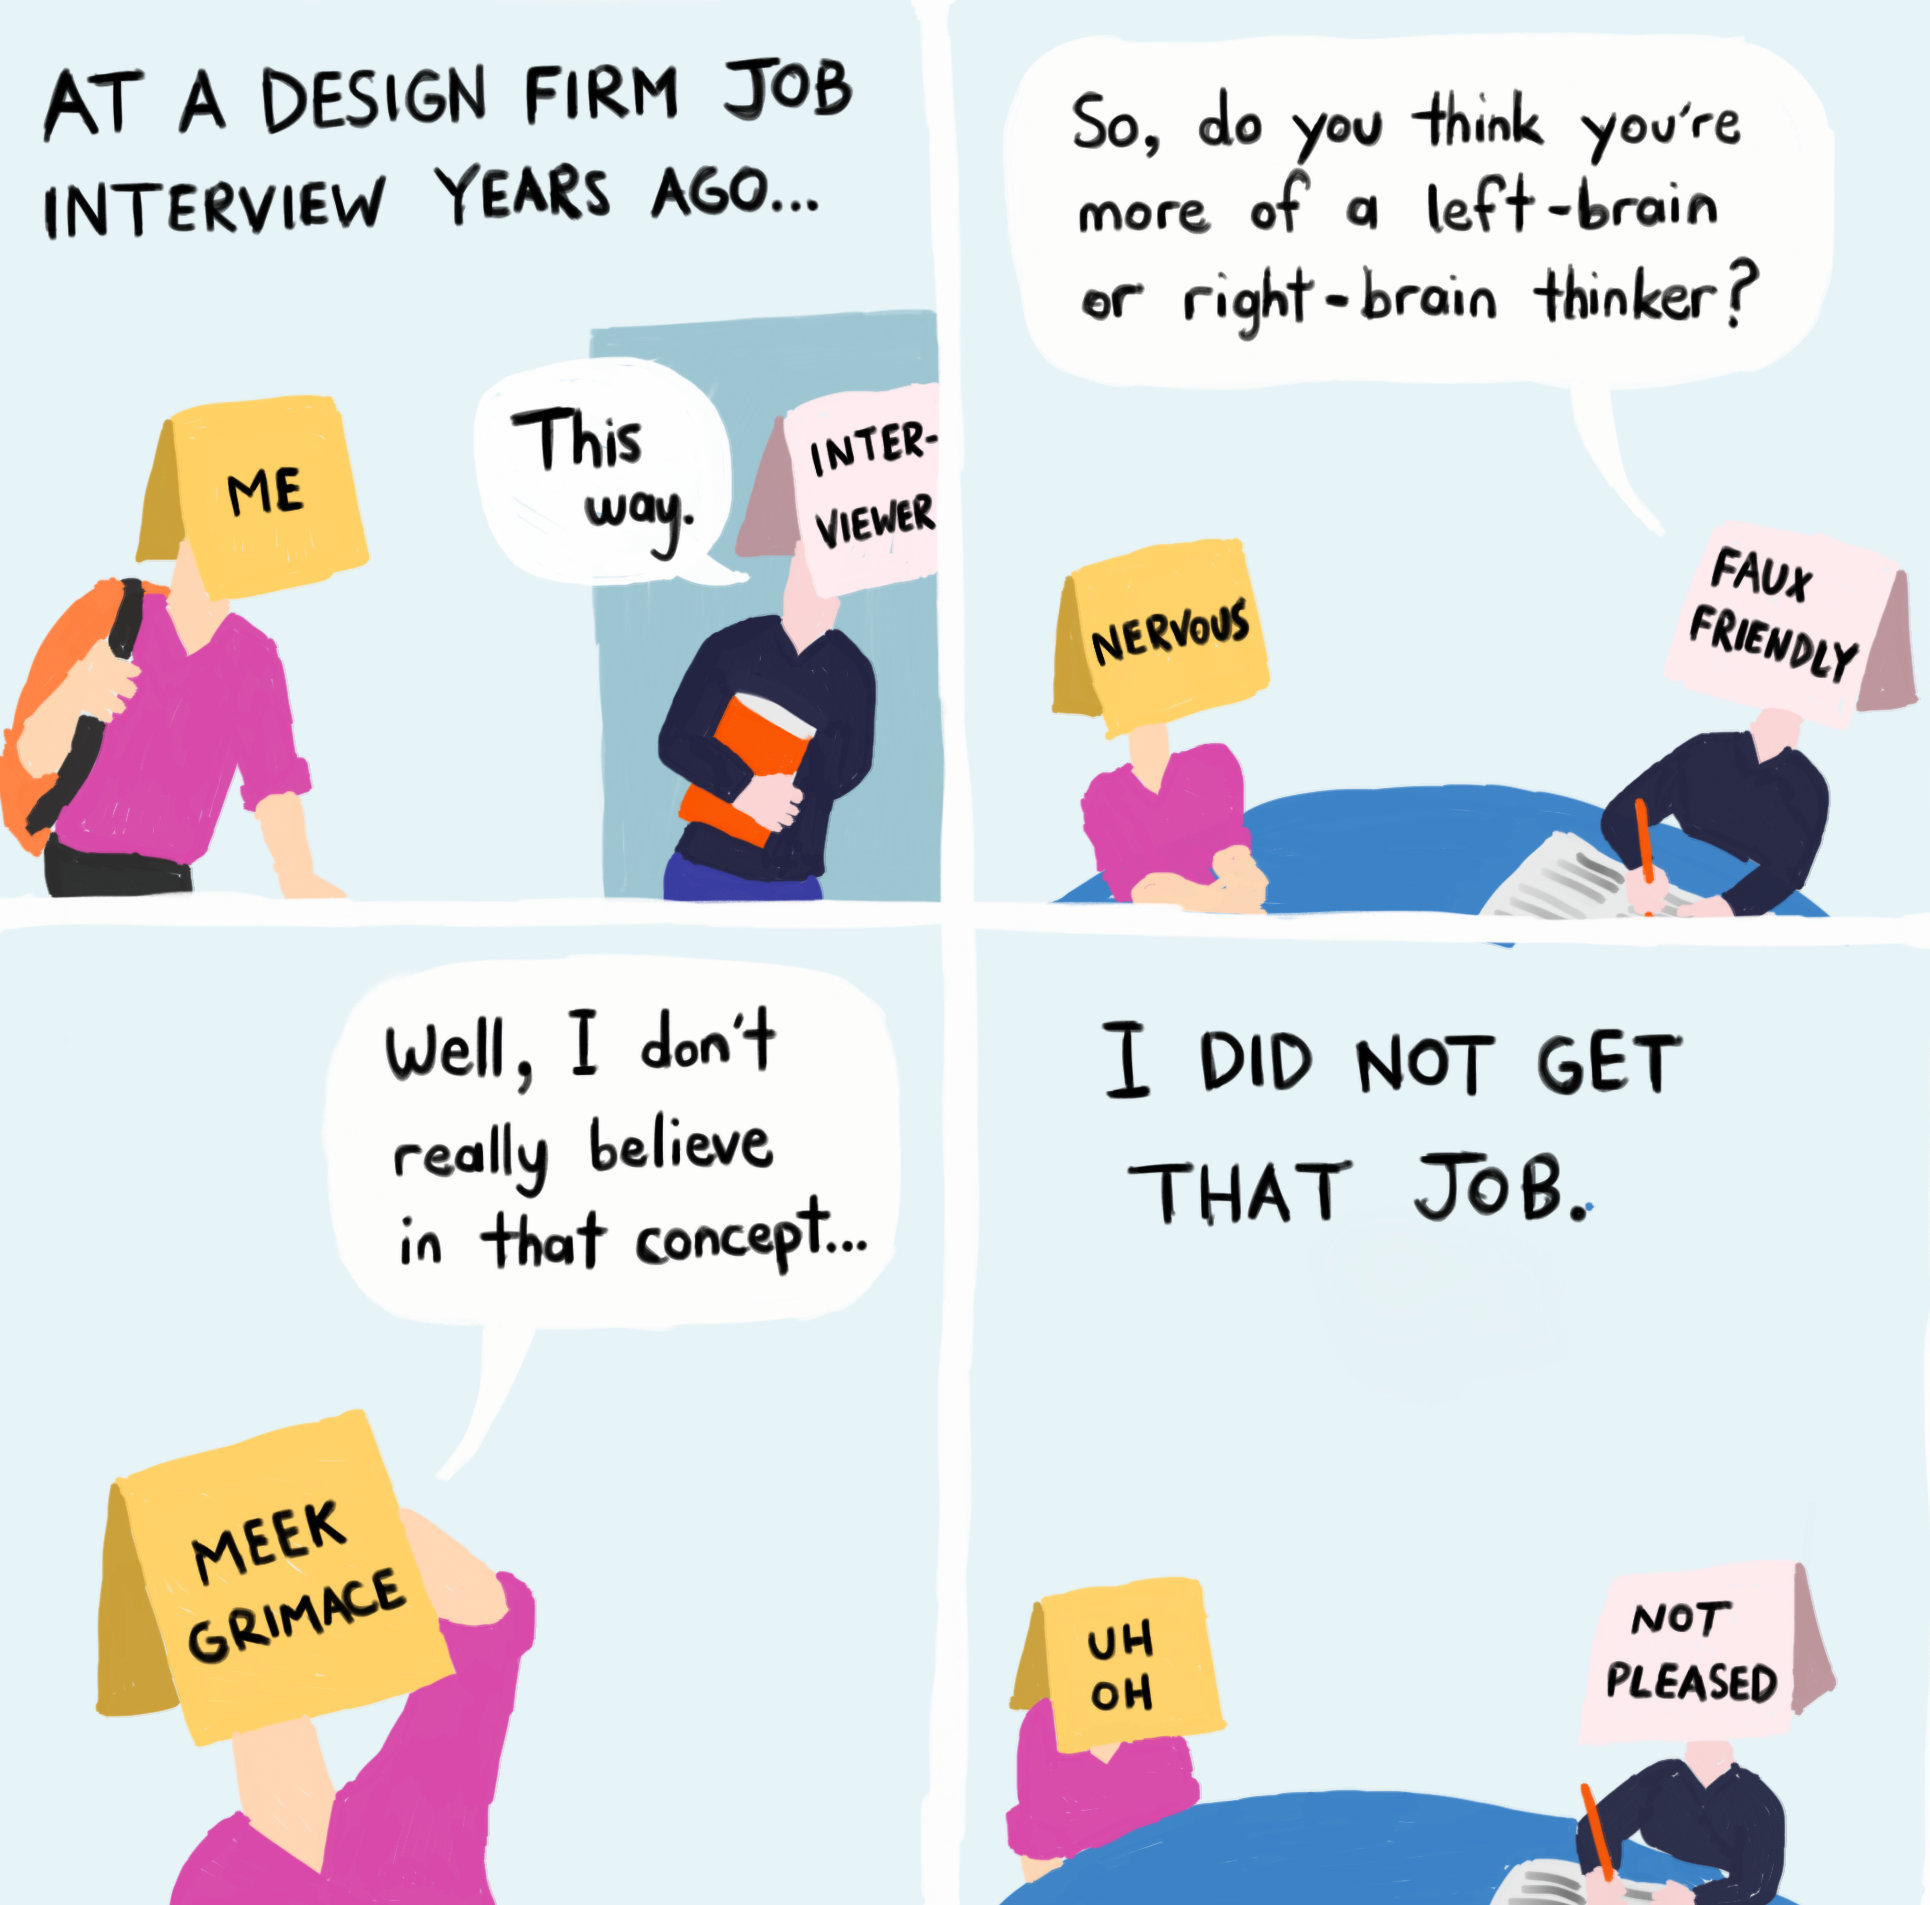 A four-panel coming showing the author going to a design job interview, being asked if he's left or right brained, him admitting he doesn't believe in the concept, and then him not getting the job